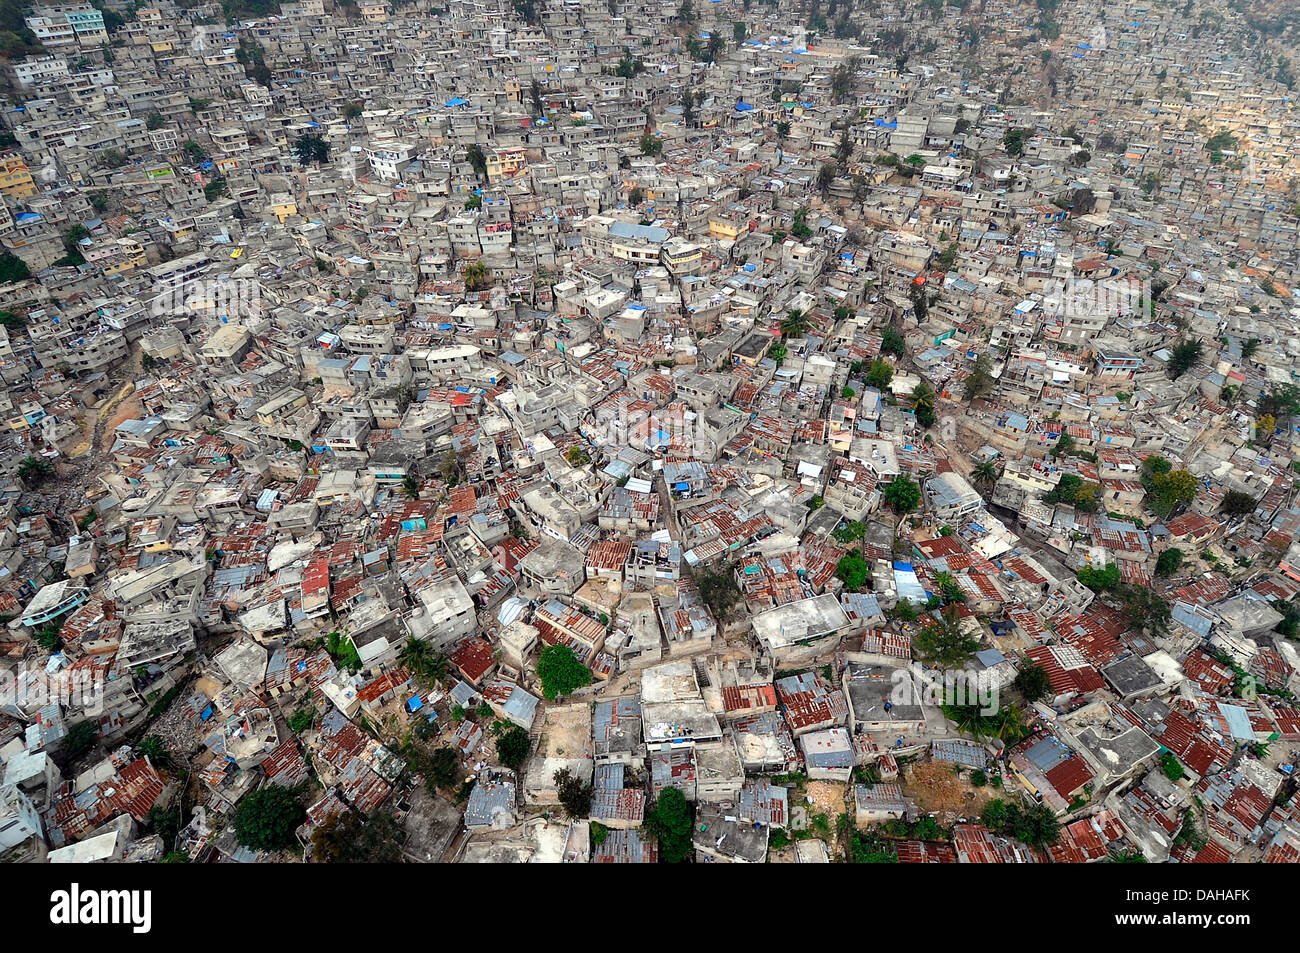 Aerial view of damaged buildings in the aftermath of a 7.0 magnitude earthquake that killed 220,000 people March 16, 2010 in Port-au-Prince, Haiti. Stock Photo